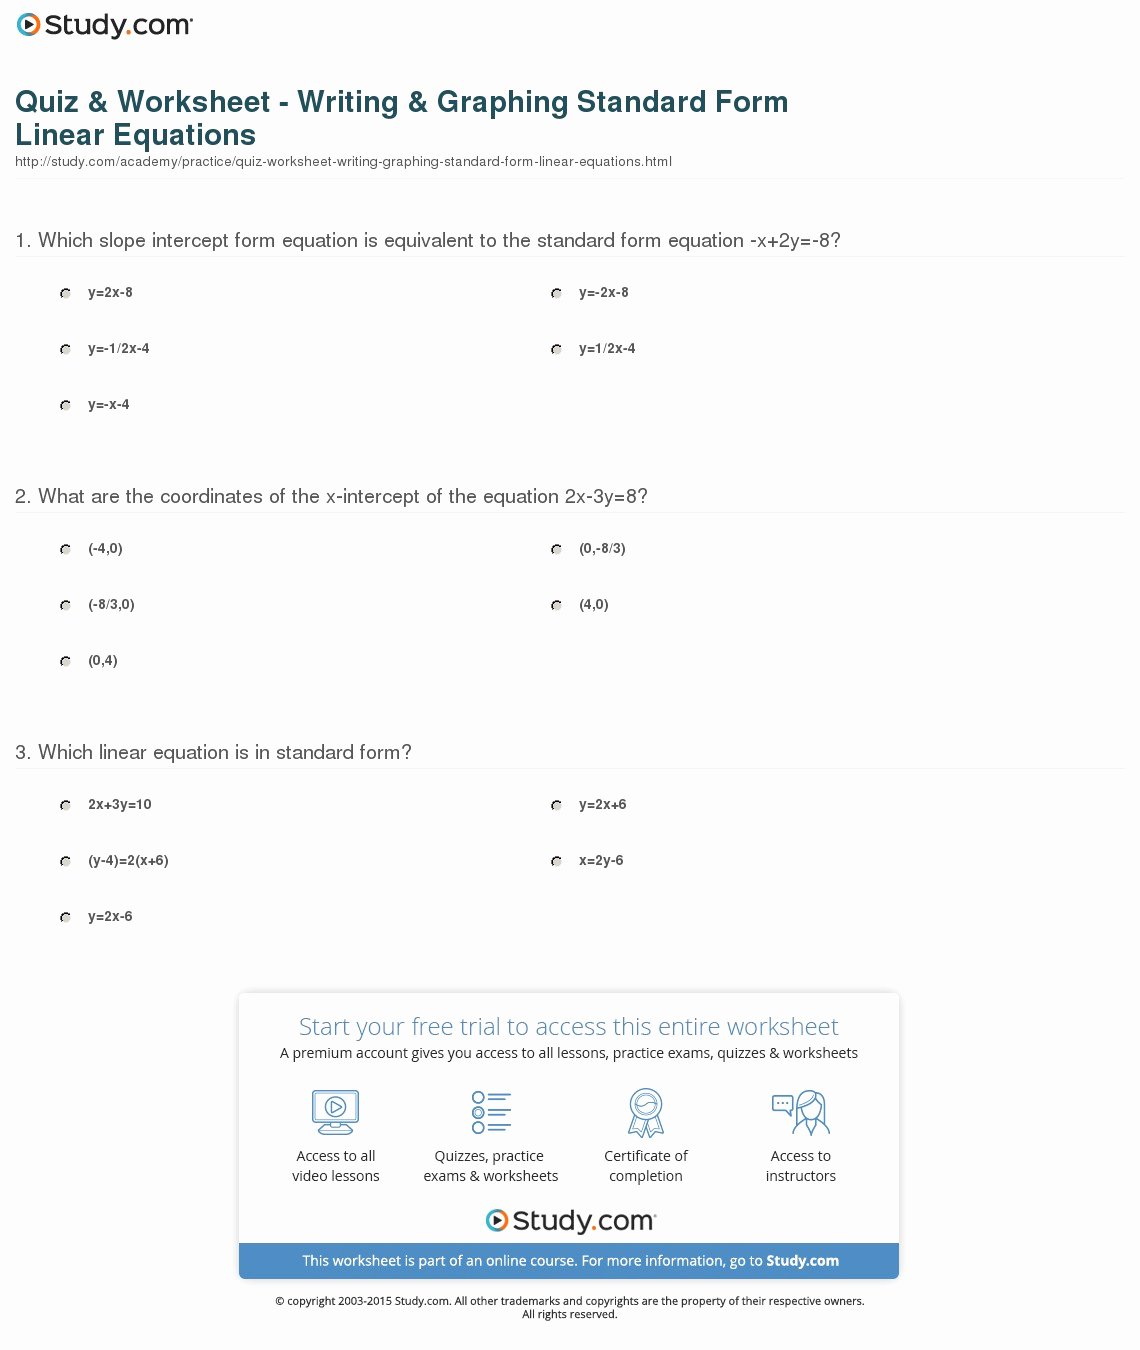 Graphing Linear Equations Worksheet Answers Lovely Quiz &amp; Worksheet Writing &amp; Graphing Standard form Linear